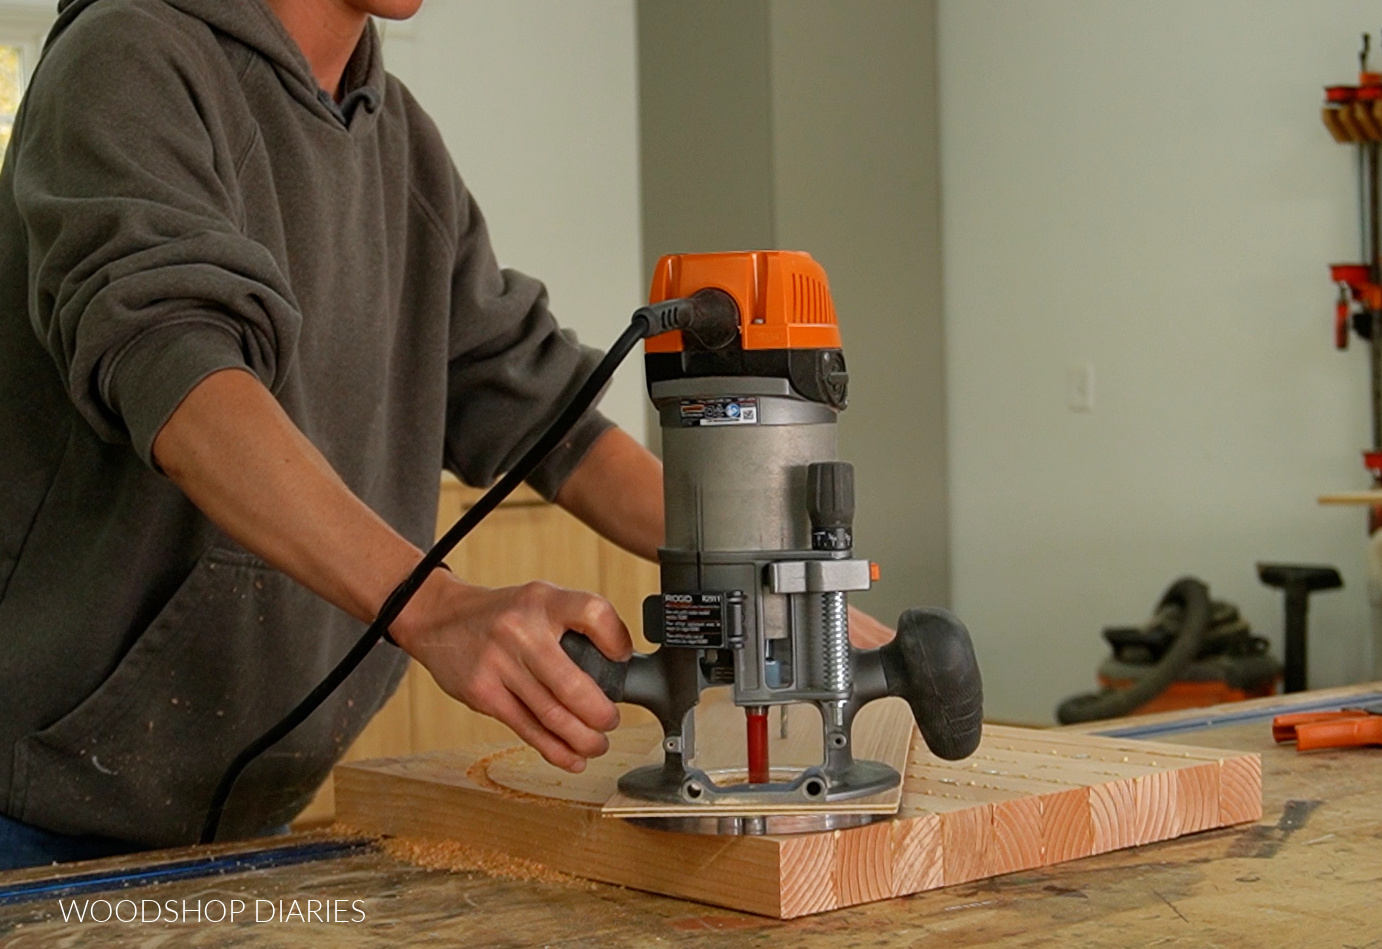 Using router and homemade circle jig to cut out round lazy susan on wooden panel on workbench